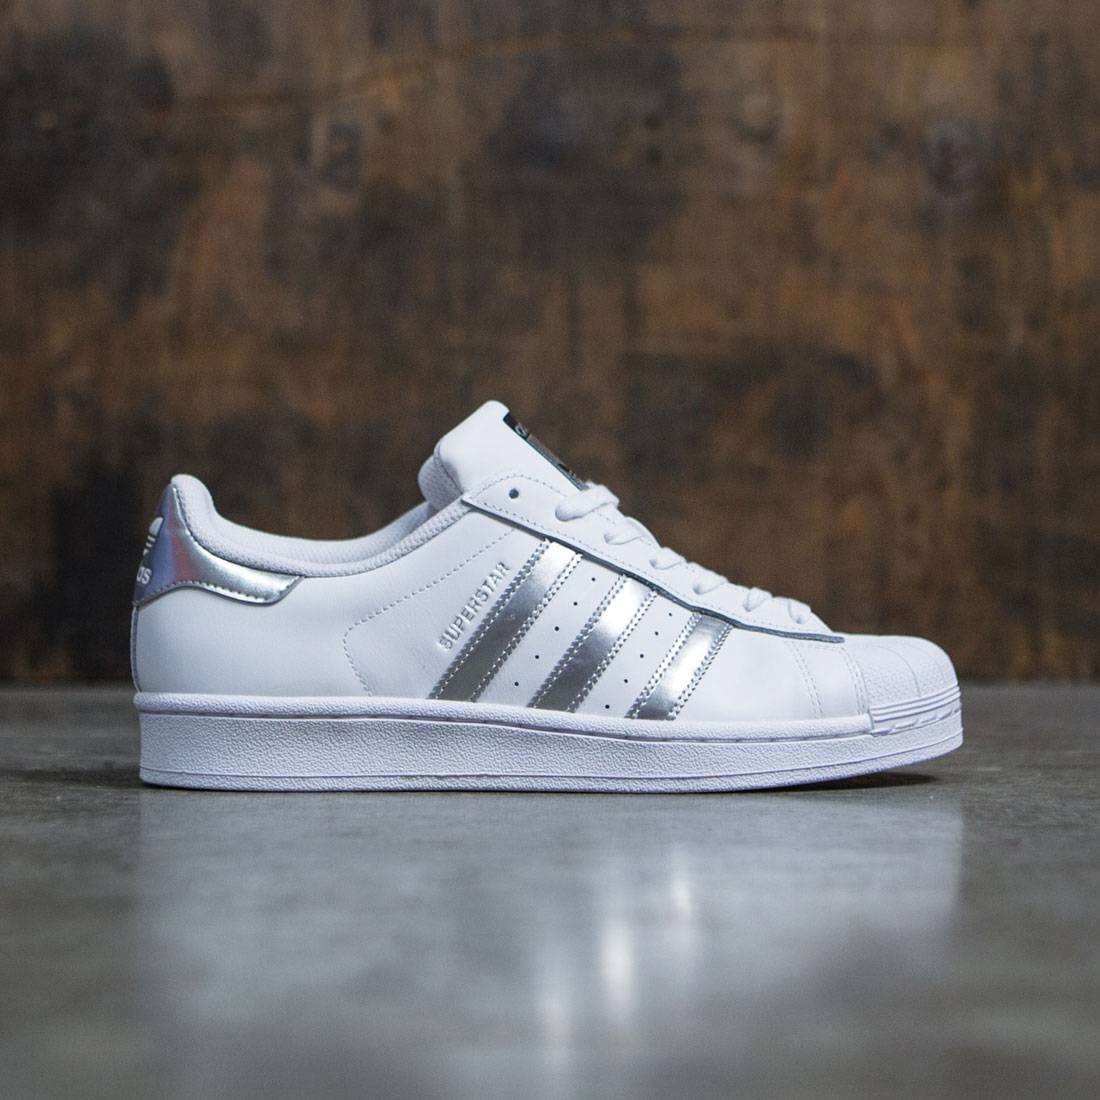 adidas superstar womens white and silver